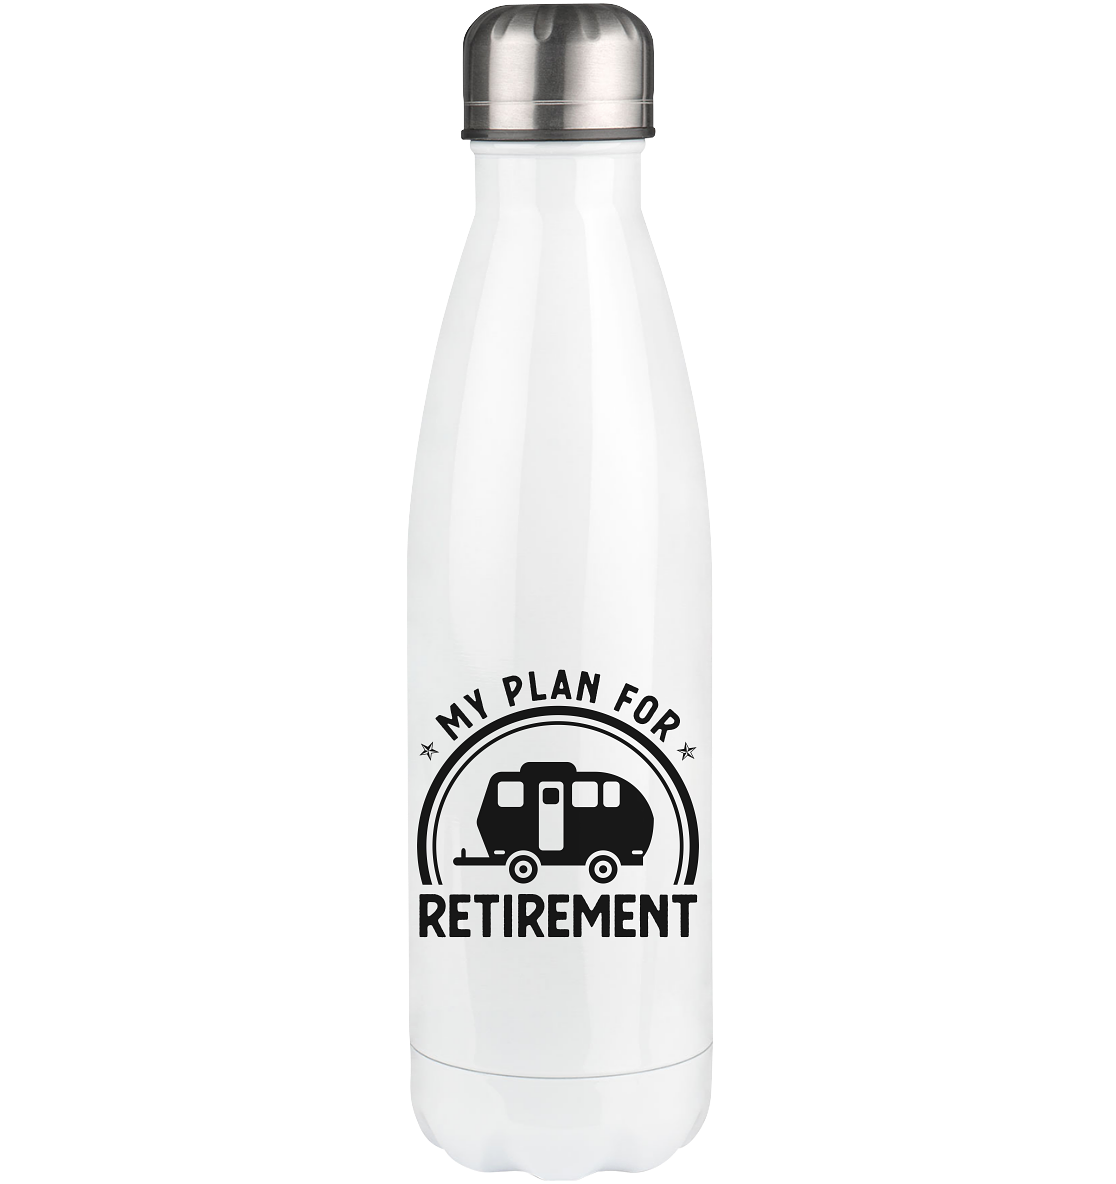 My Plan For Retirement 2 - Edelstahl Thermosflasche camping UONP 500ml